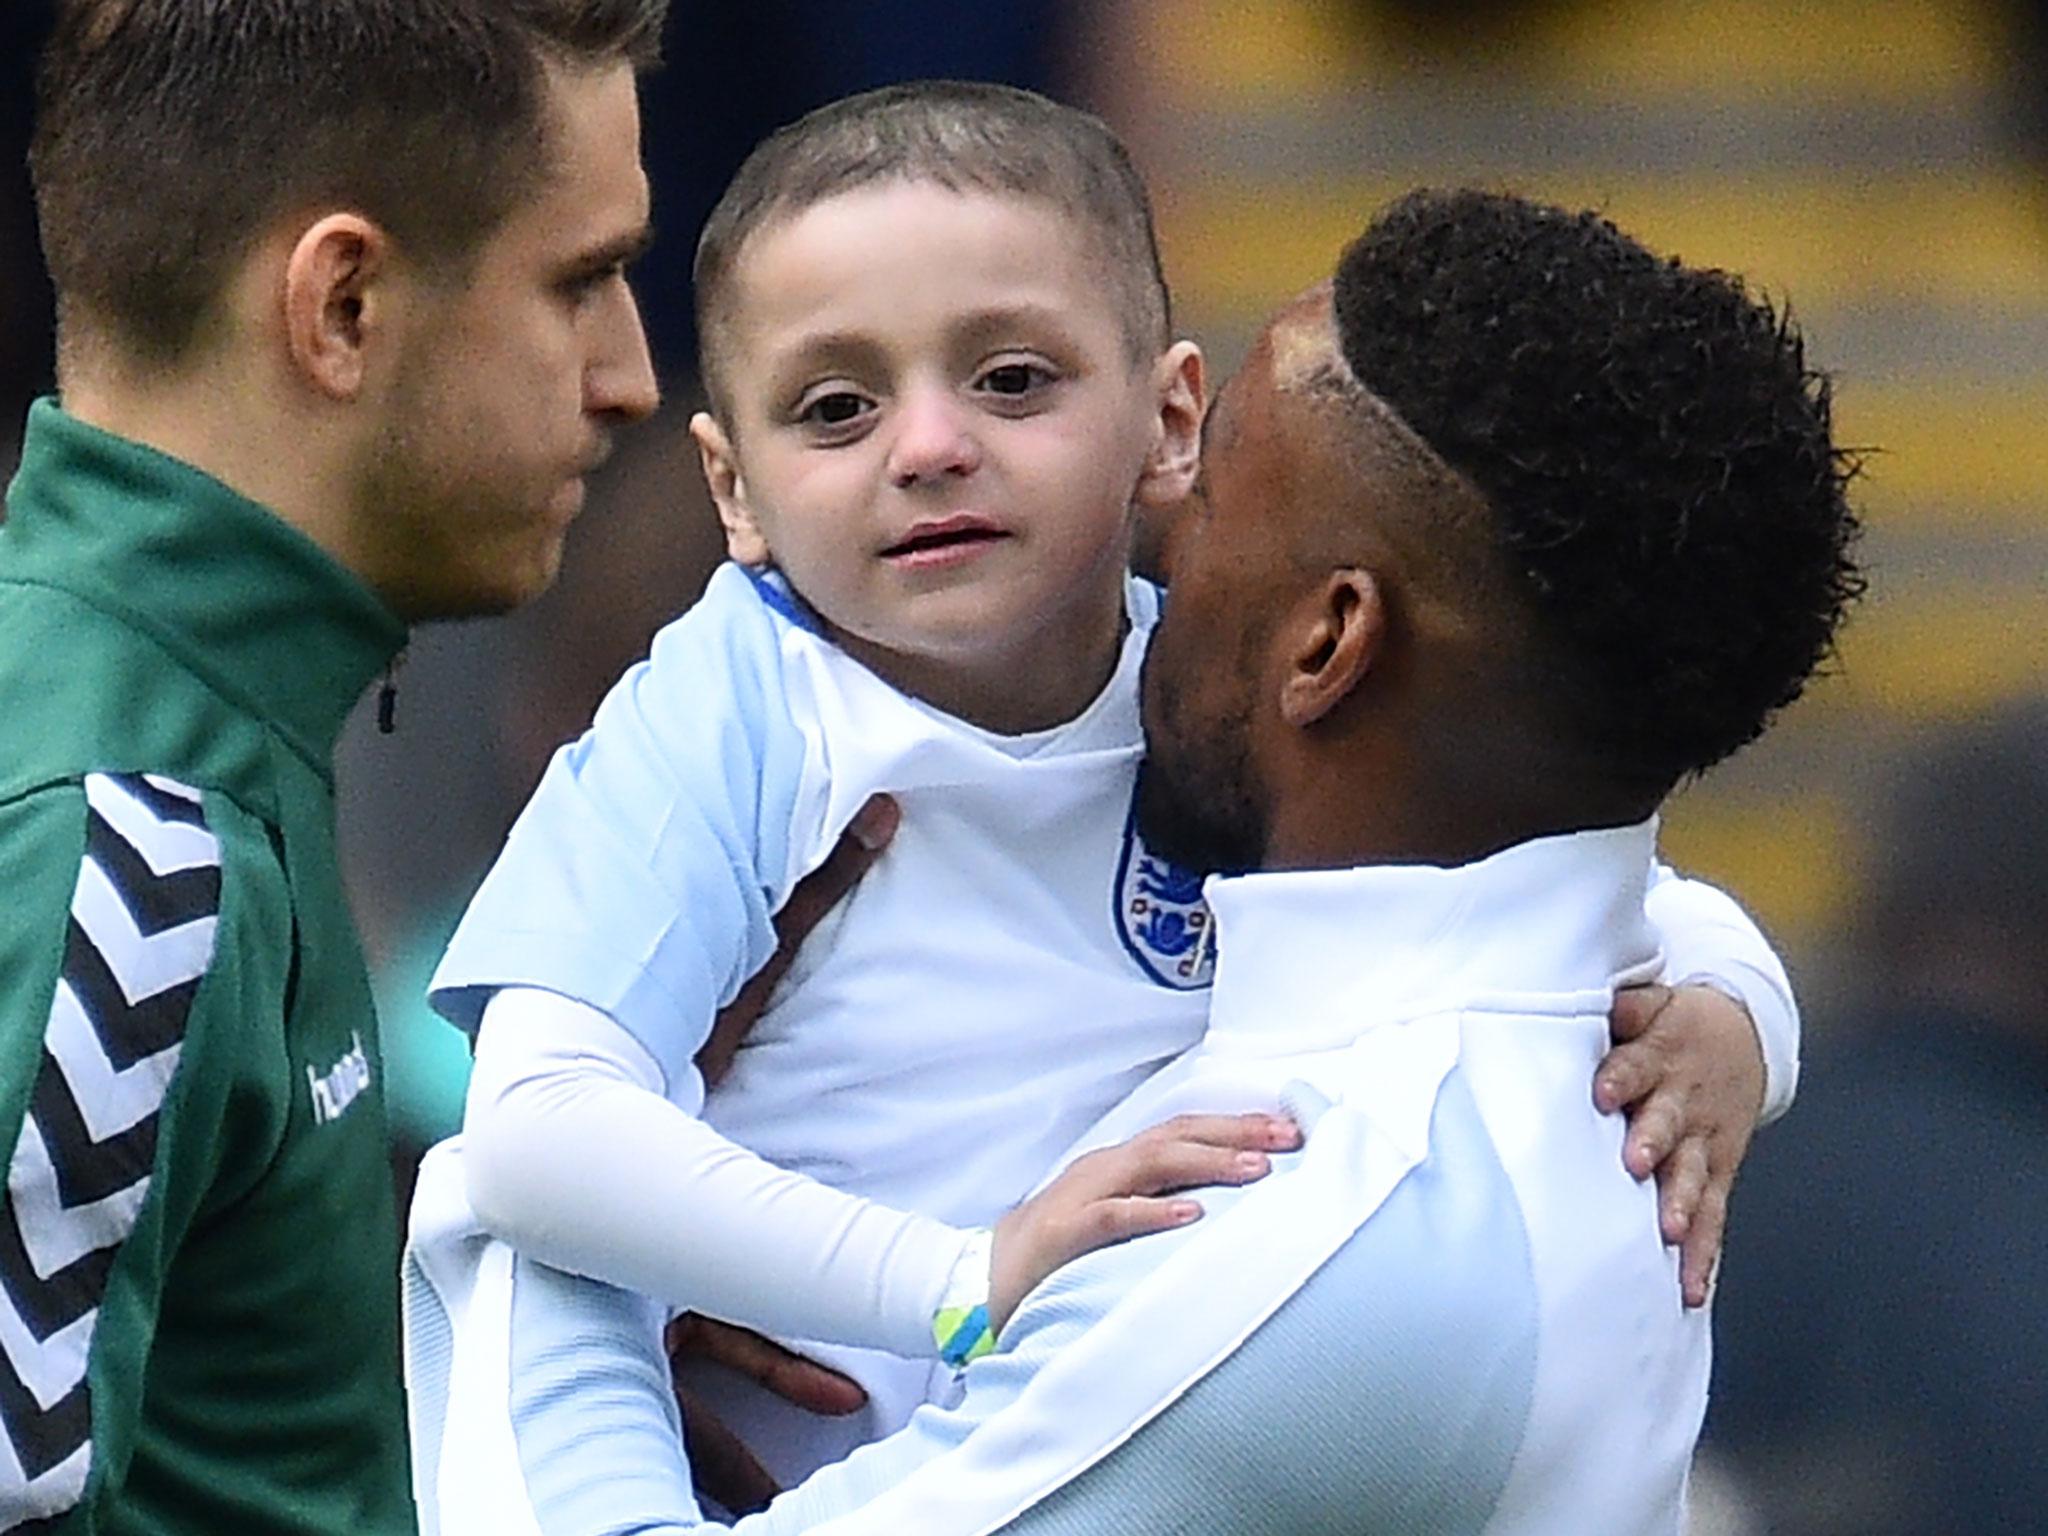 England's striker Jermain Defoe (R) holds Bradley Lowery, a five-year-old suffering from terminal cancer, mascot for the match, ahead of the World Cup 2018 qualification football match between England and Lithuania at Wembley